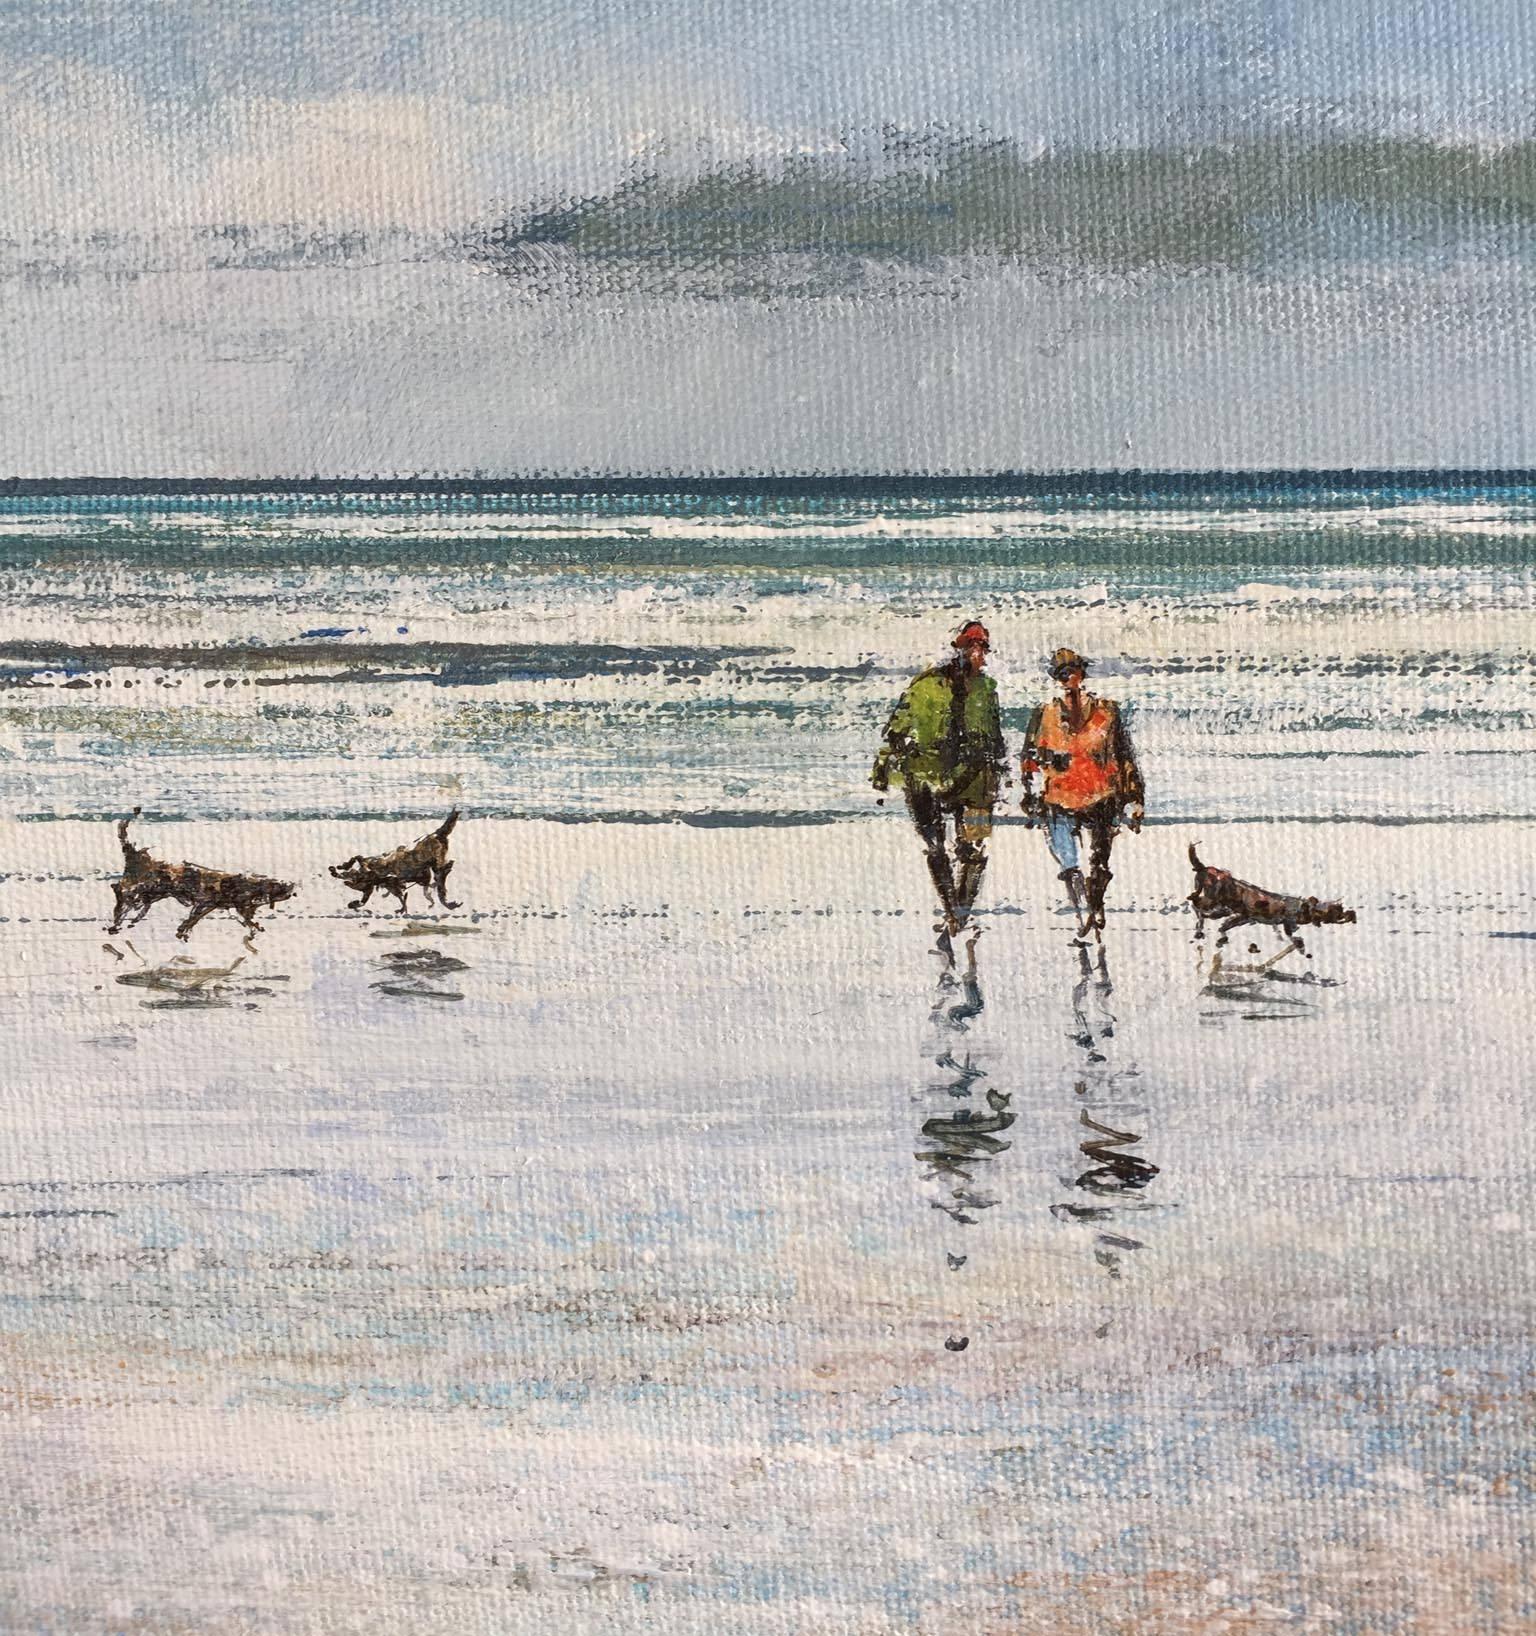 'An Afternoon Stroll' by Michael Sanders is an original mixed media painting on canvas using acrylic and oil paint. Michael Sanders has an extraordinary talent as he is able to capture the light and reflections coming off of the sea splendidly